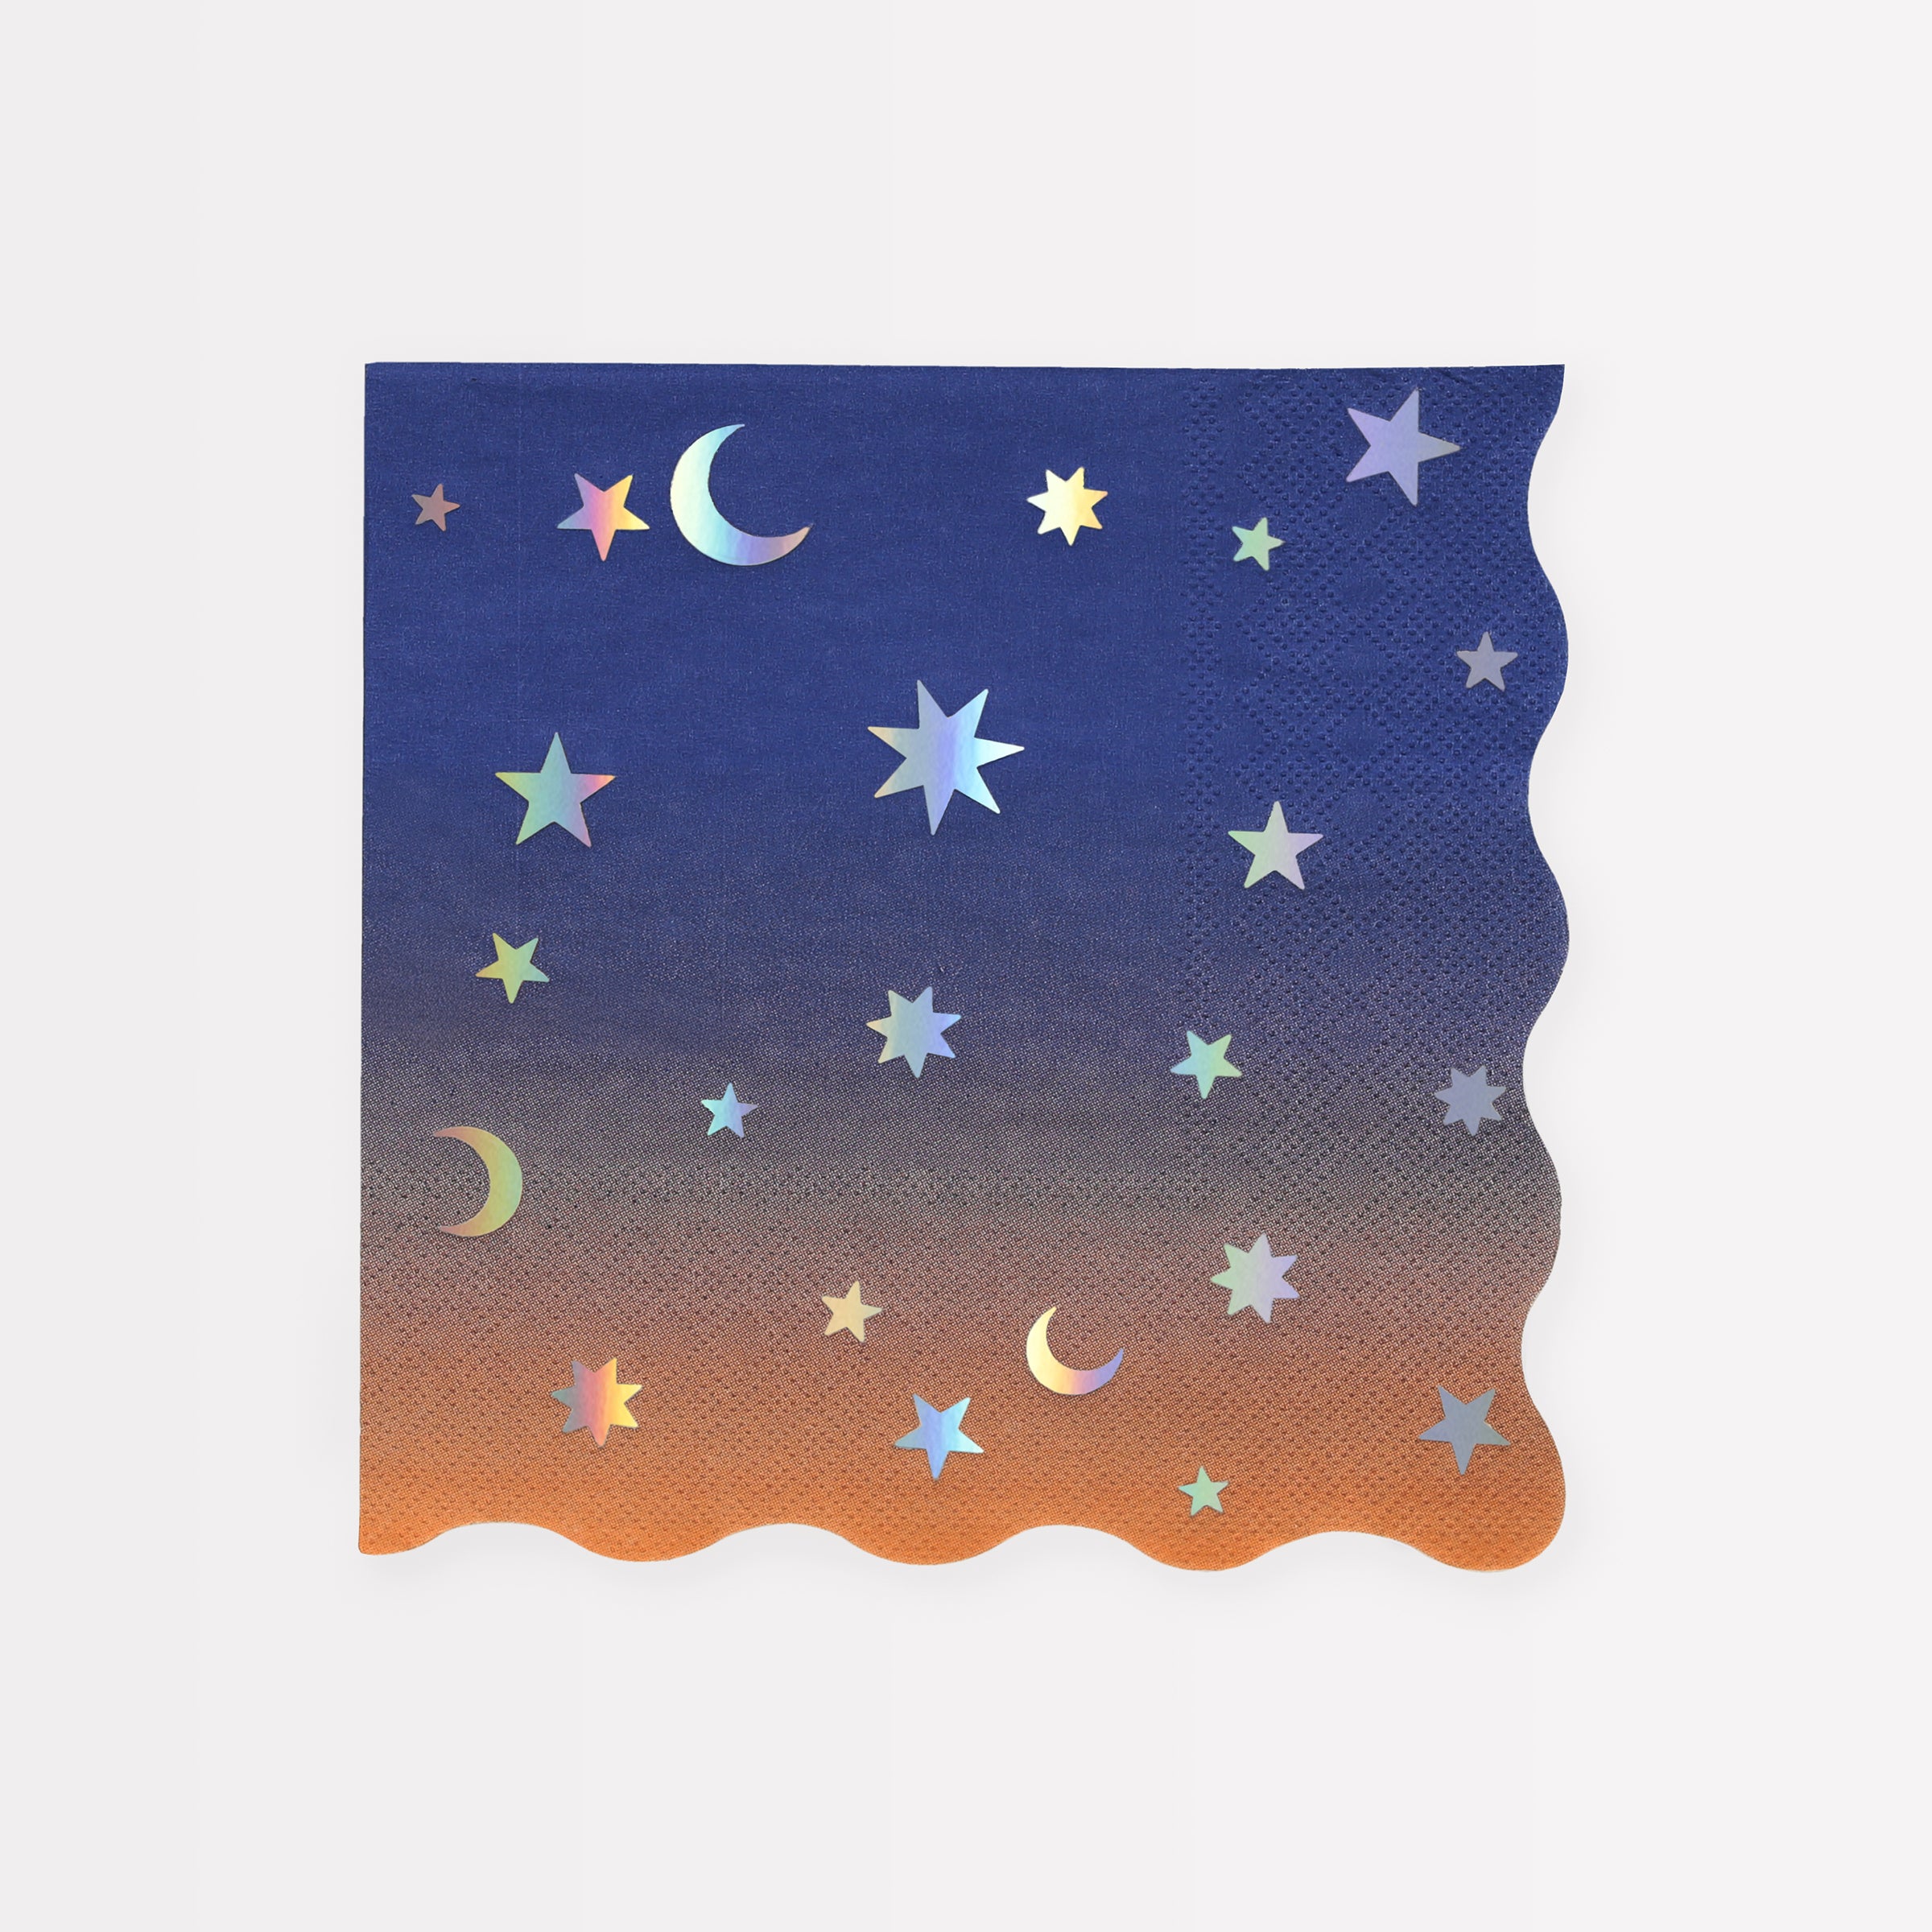 Our paper napkins, featuring stars and moons, are perfect for a magic party, witch party, wizard party or for your Halloween party ideas.